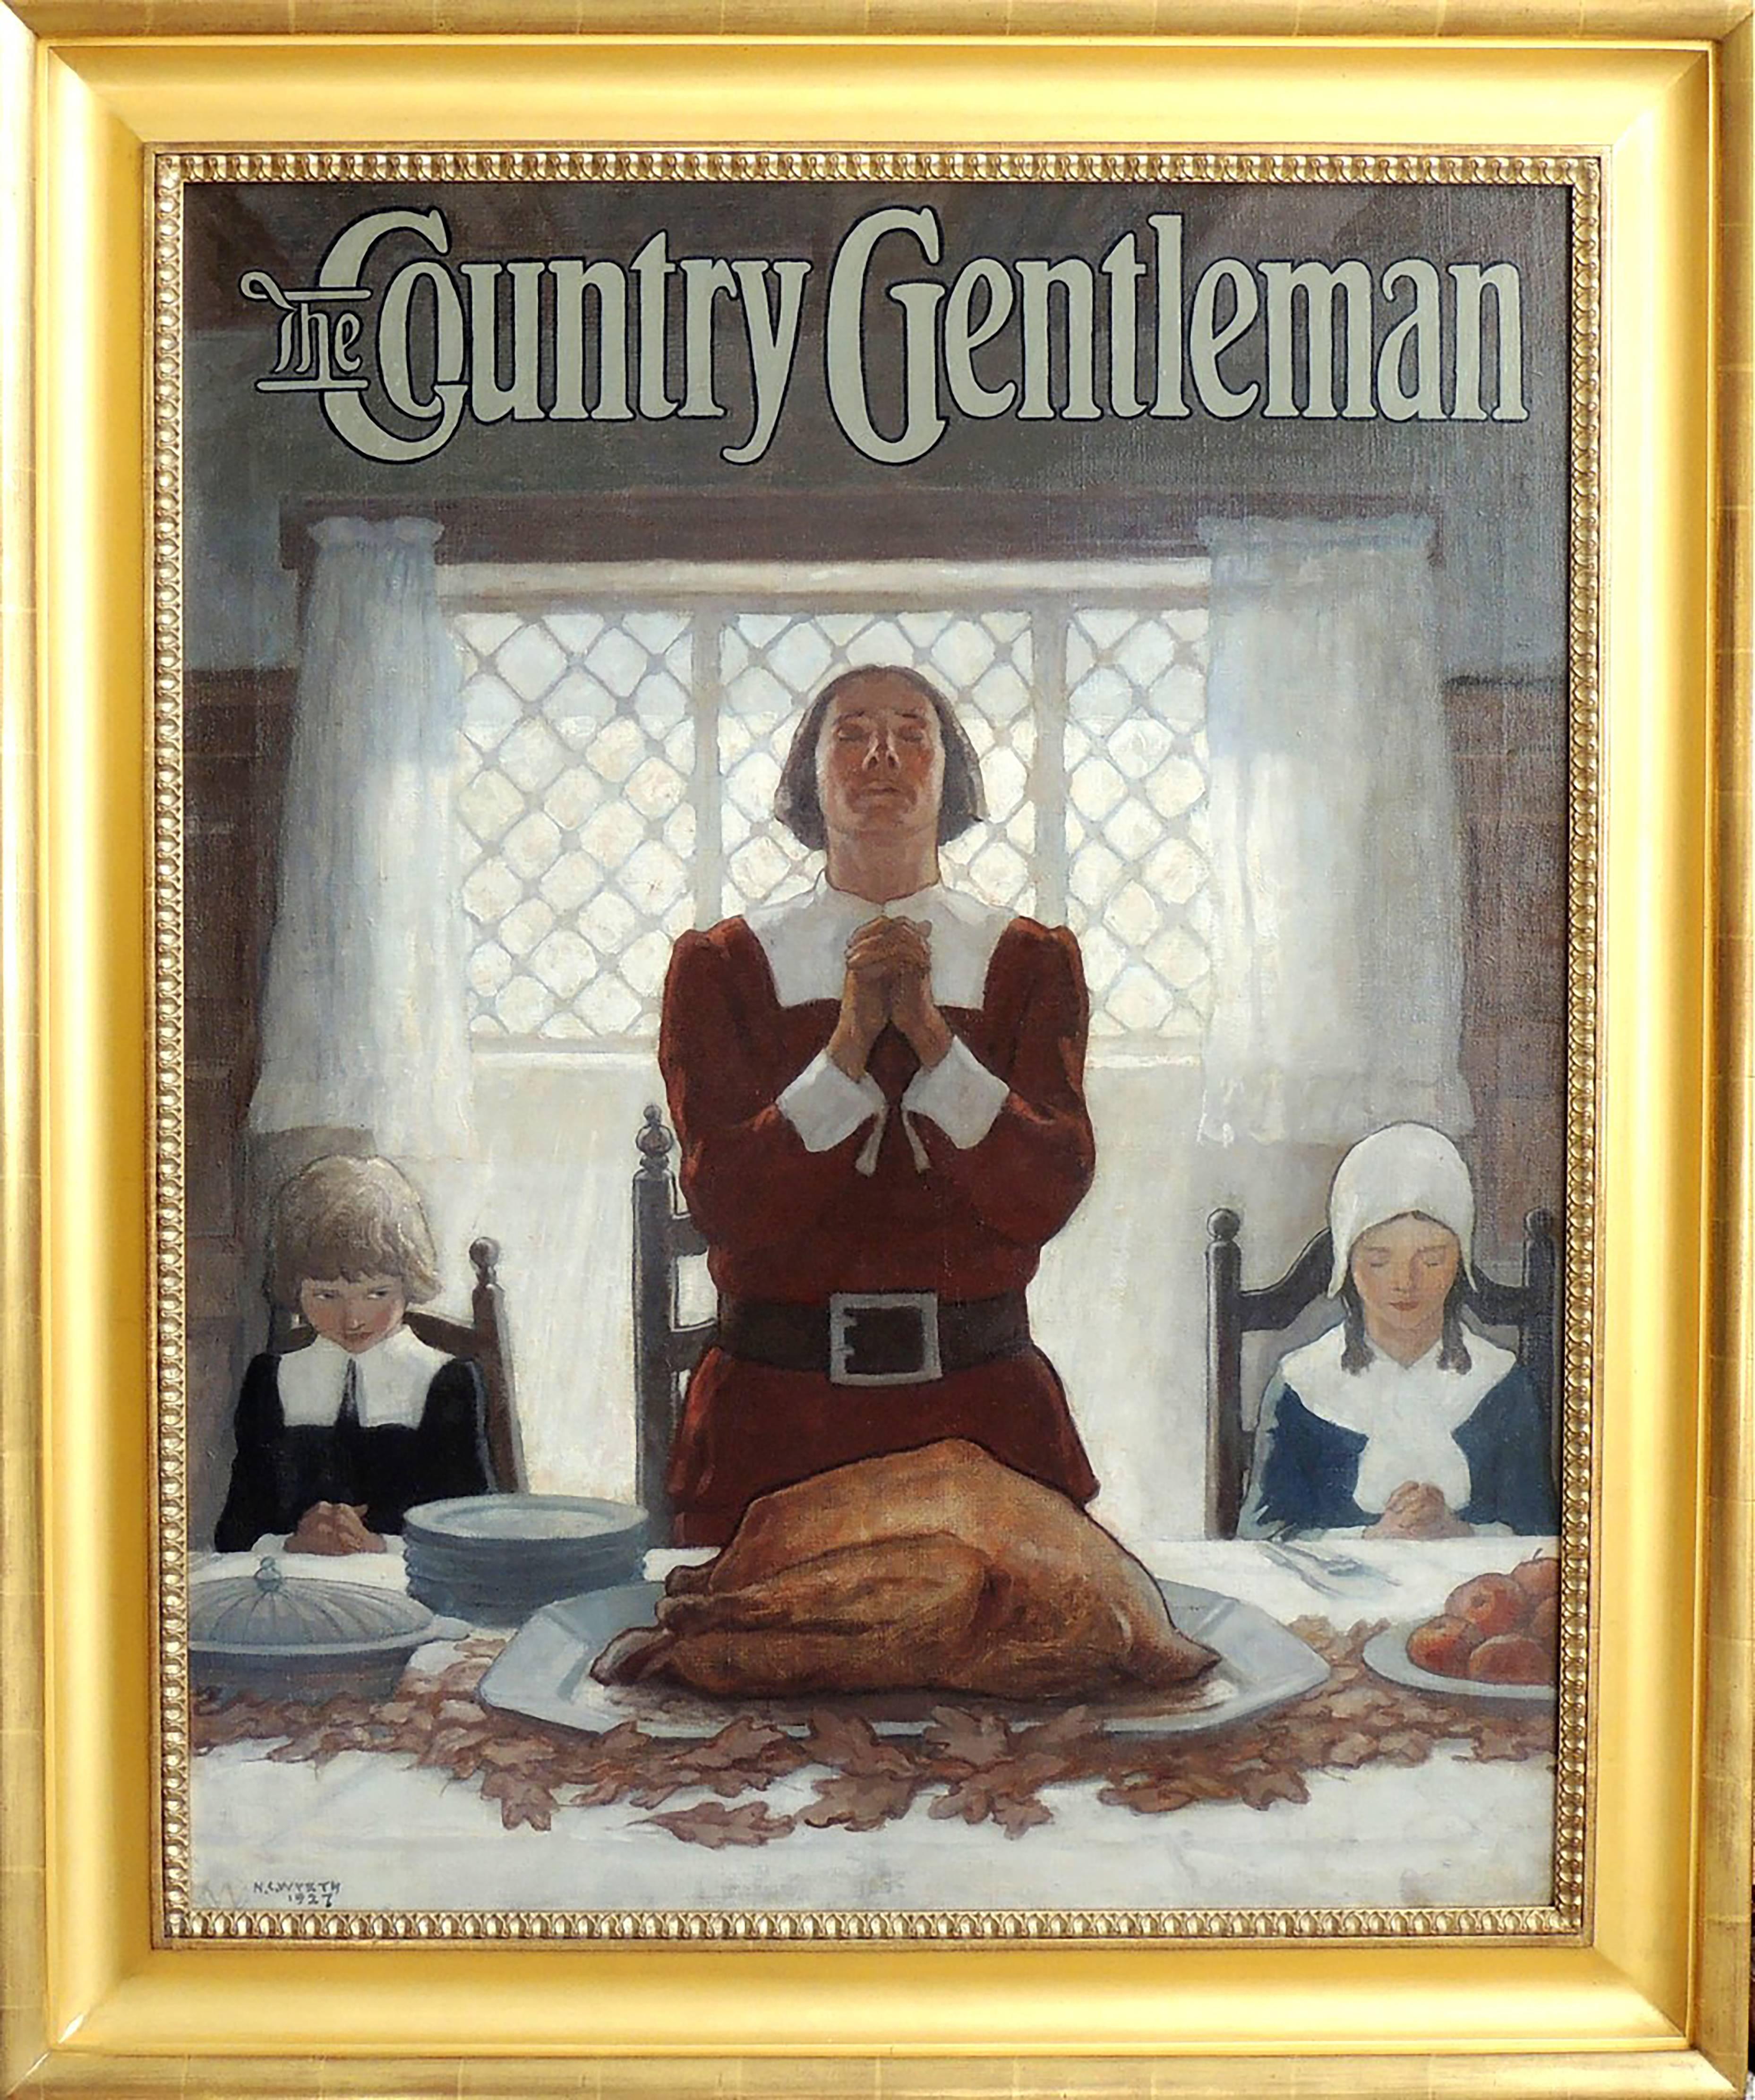 Country Gentleman (An frühes Thanksgiving) – Painting von Newell Convers Wyeth